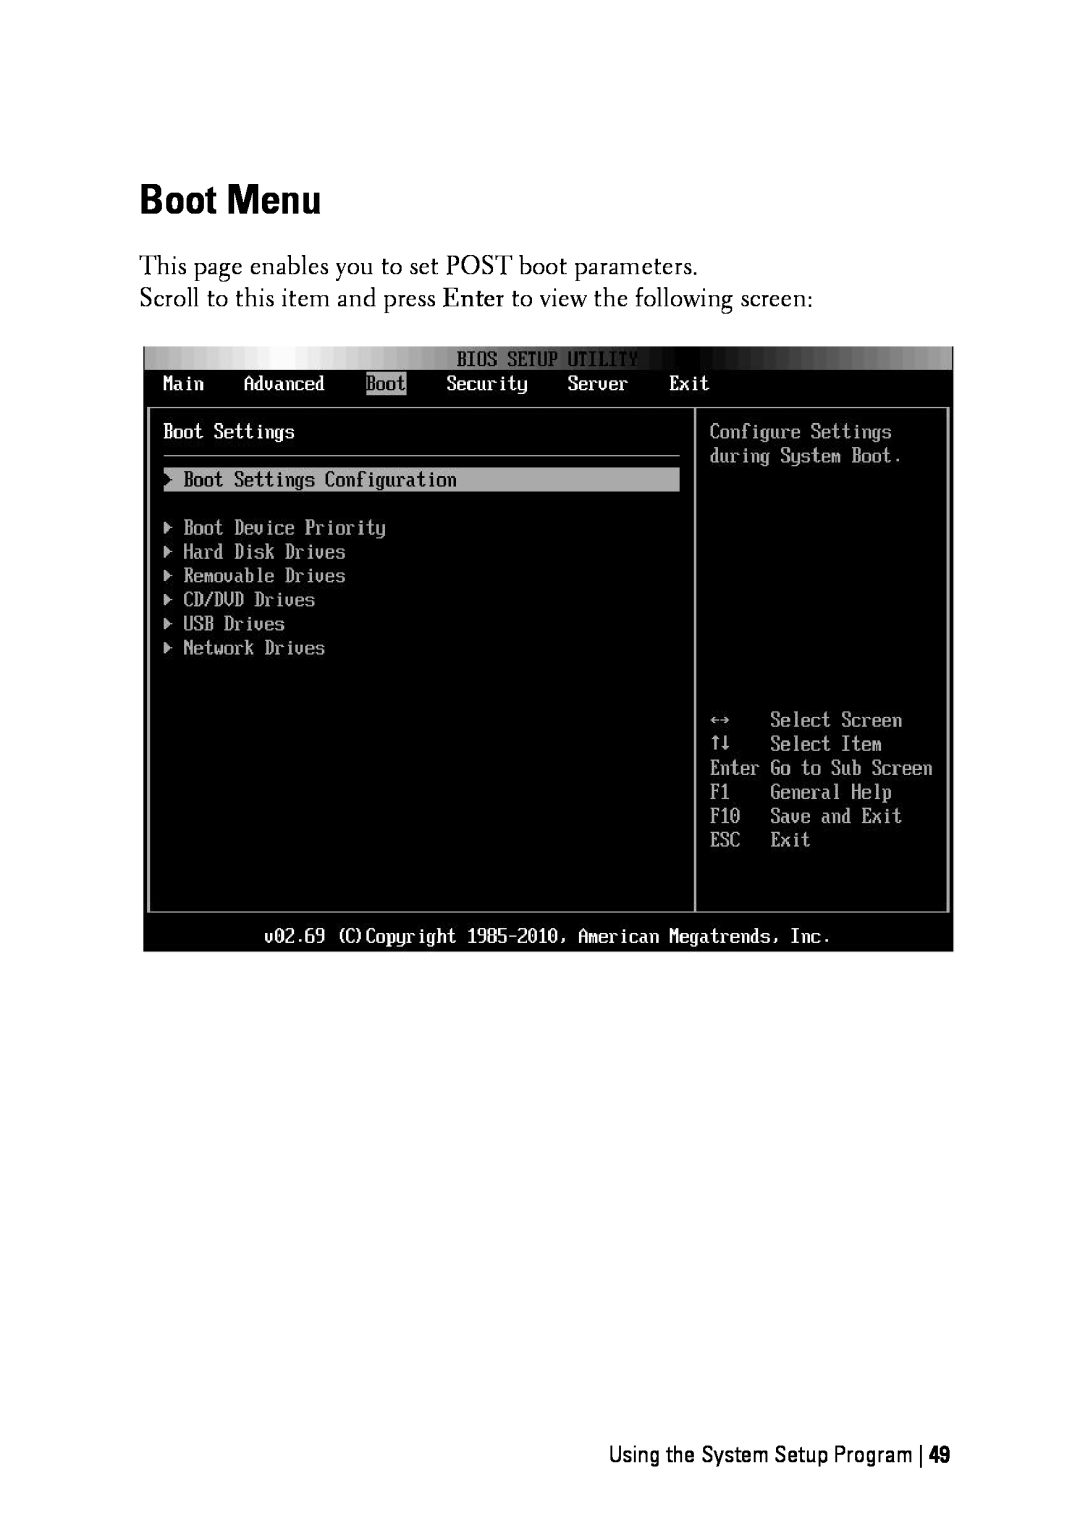 Dell C6145 manual Boot Menu, This page enables you to set POST boot parameters, Using the System Setup Program 